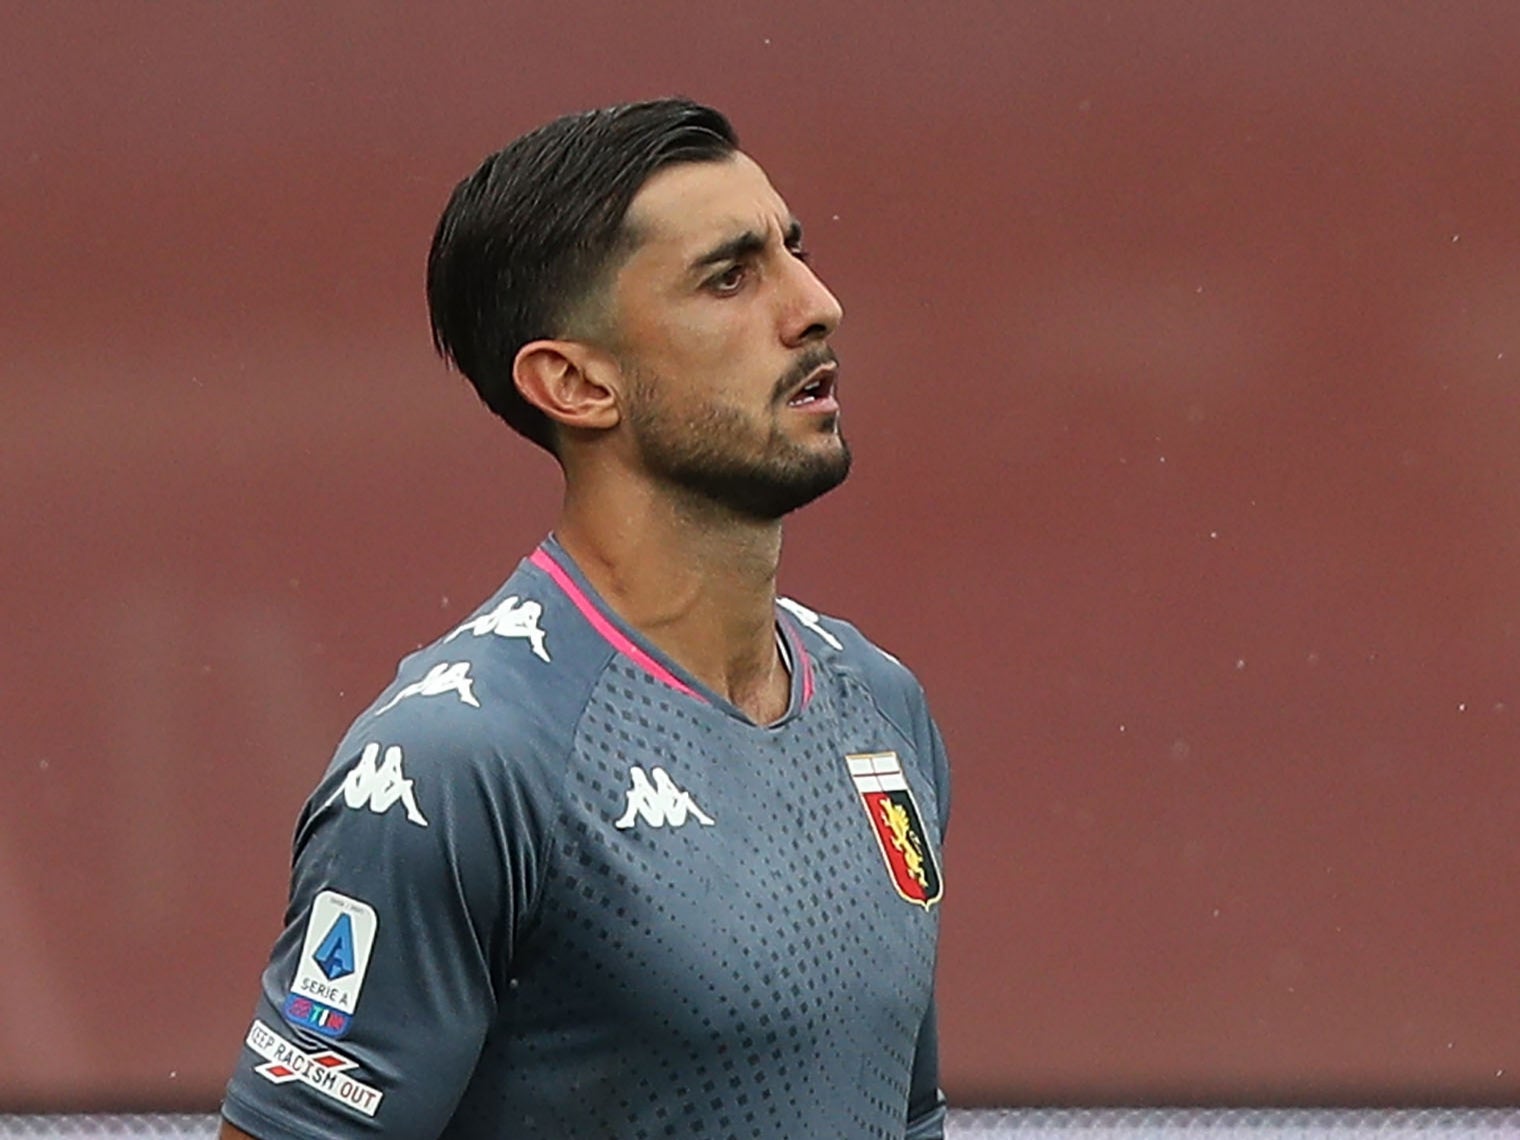 Genoa goalkeeper Mattia Perin was confirmed to have contracted Covid-19